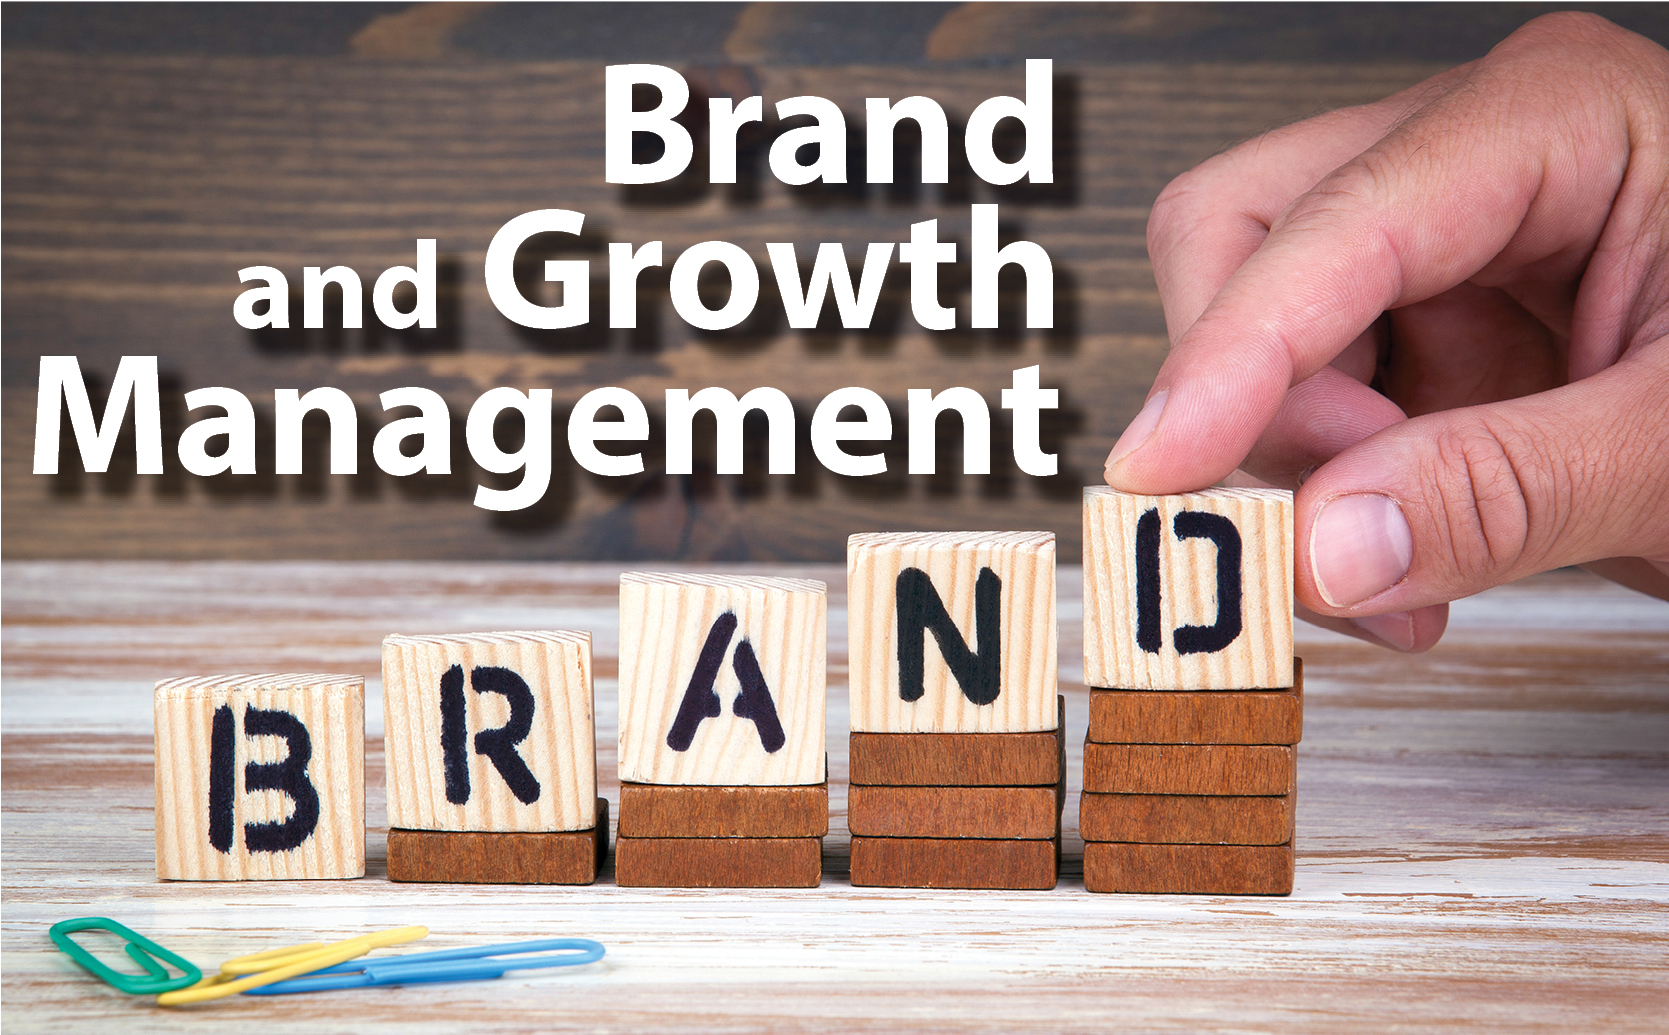 May Business Luncheon: Brand and Growth Management